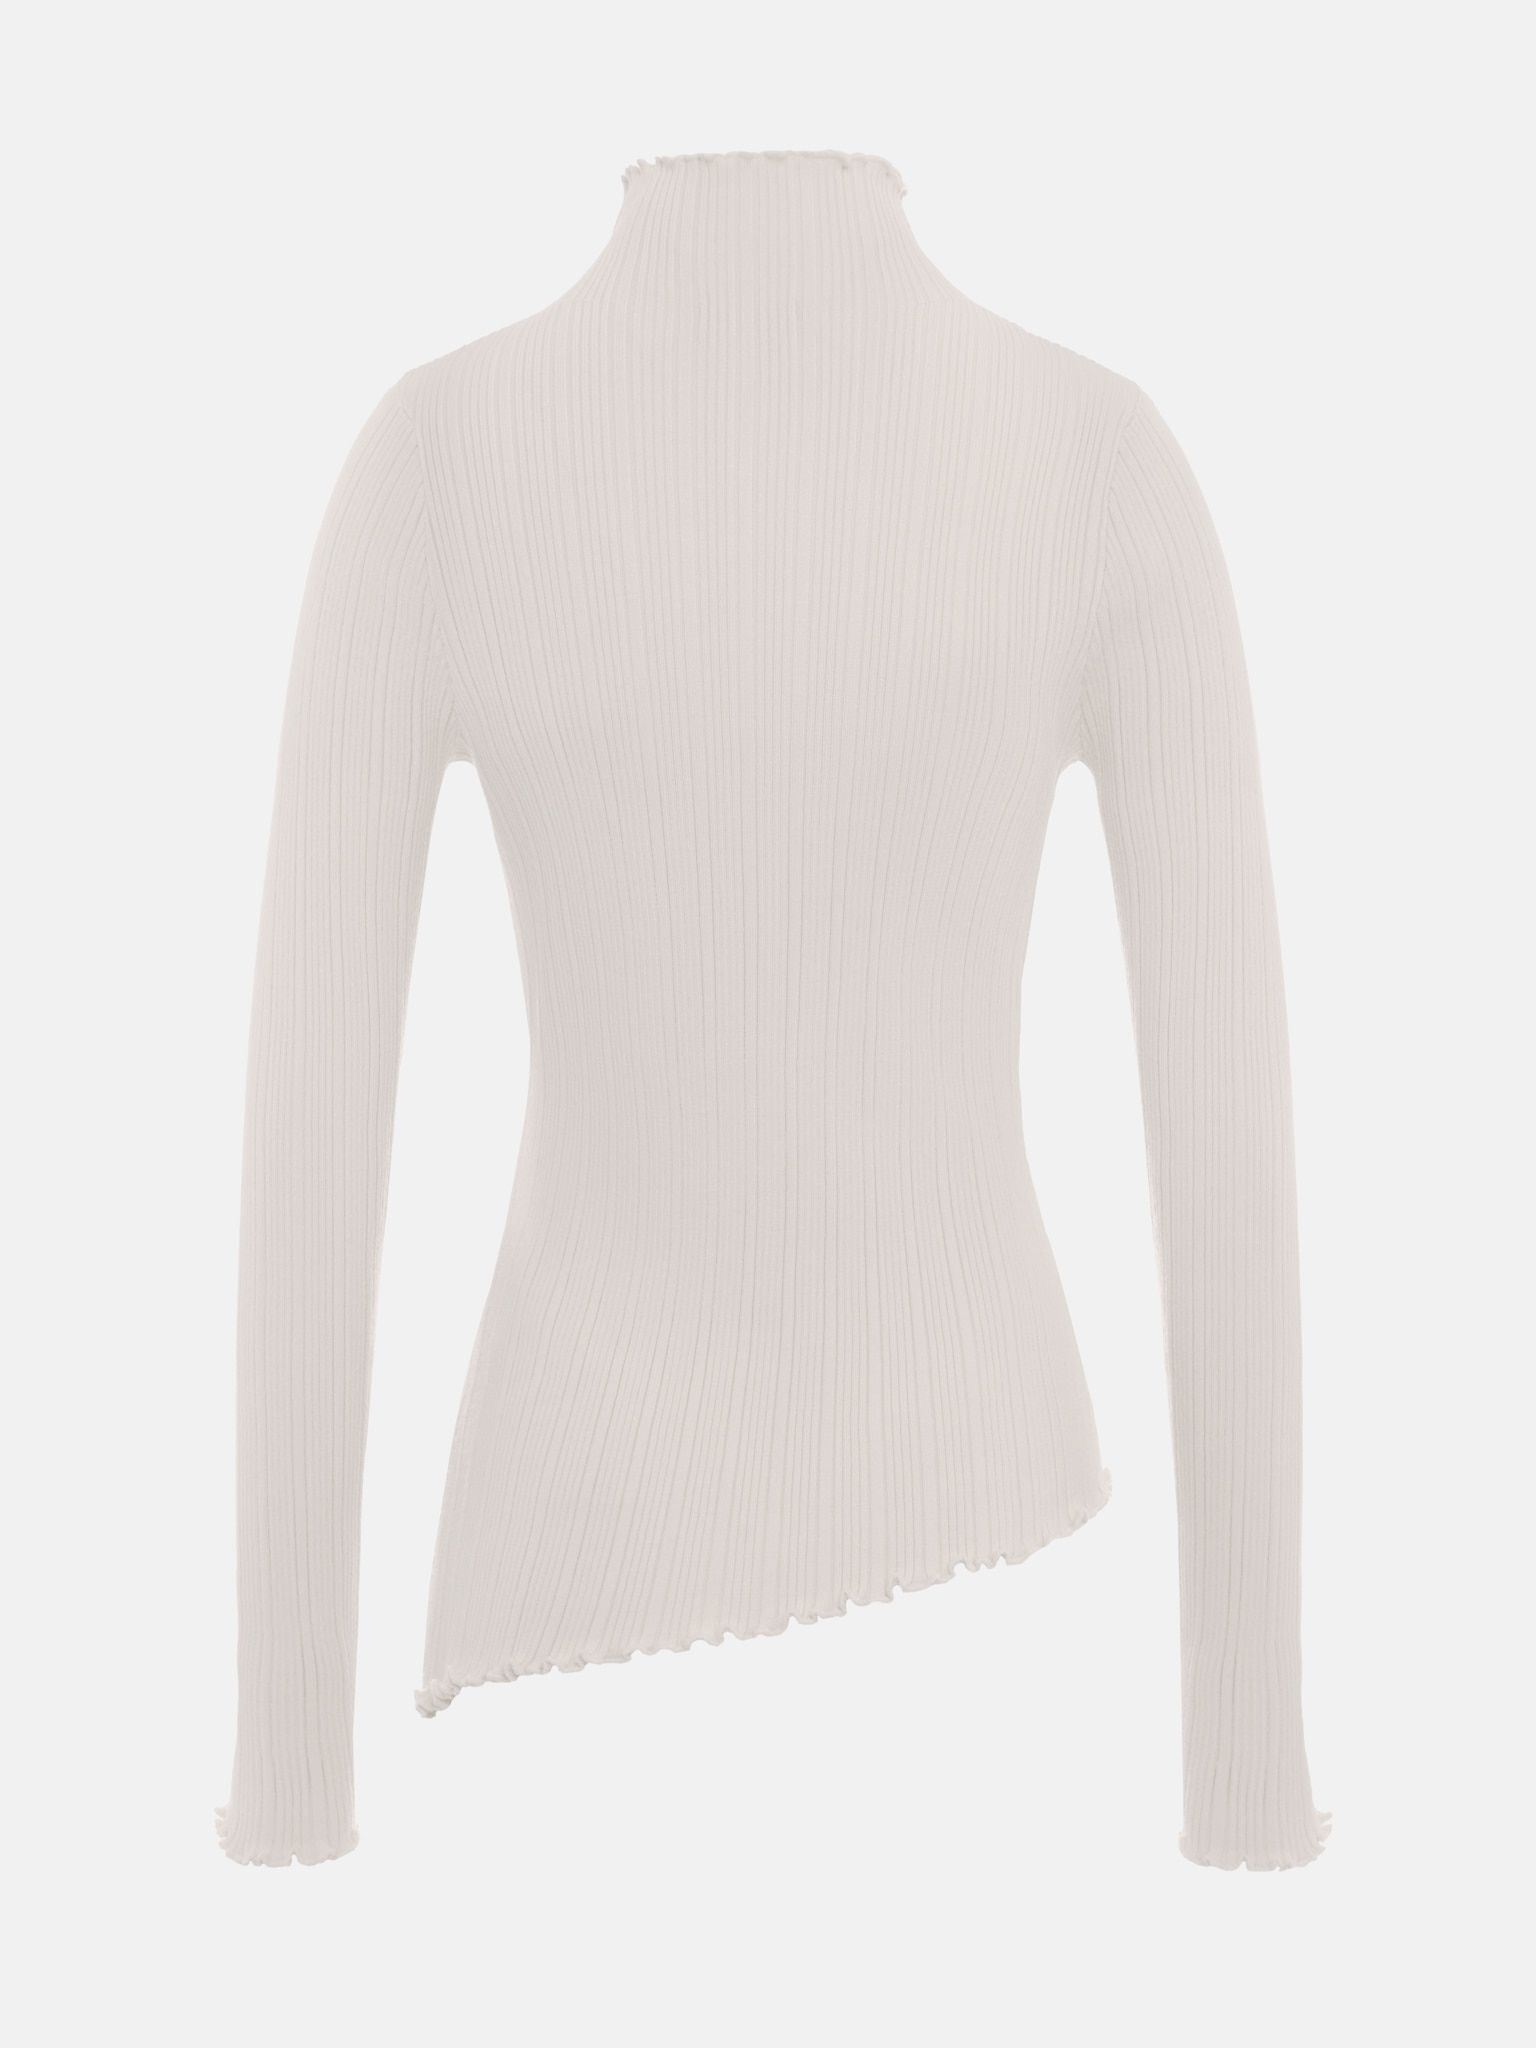 Ribbed turtleneck with collar ruffles